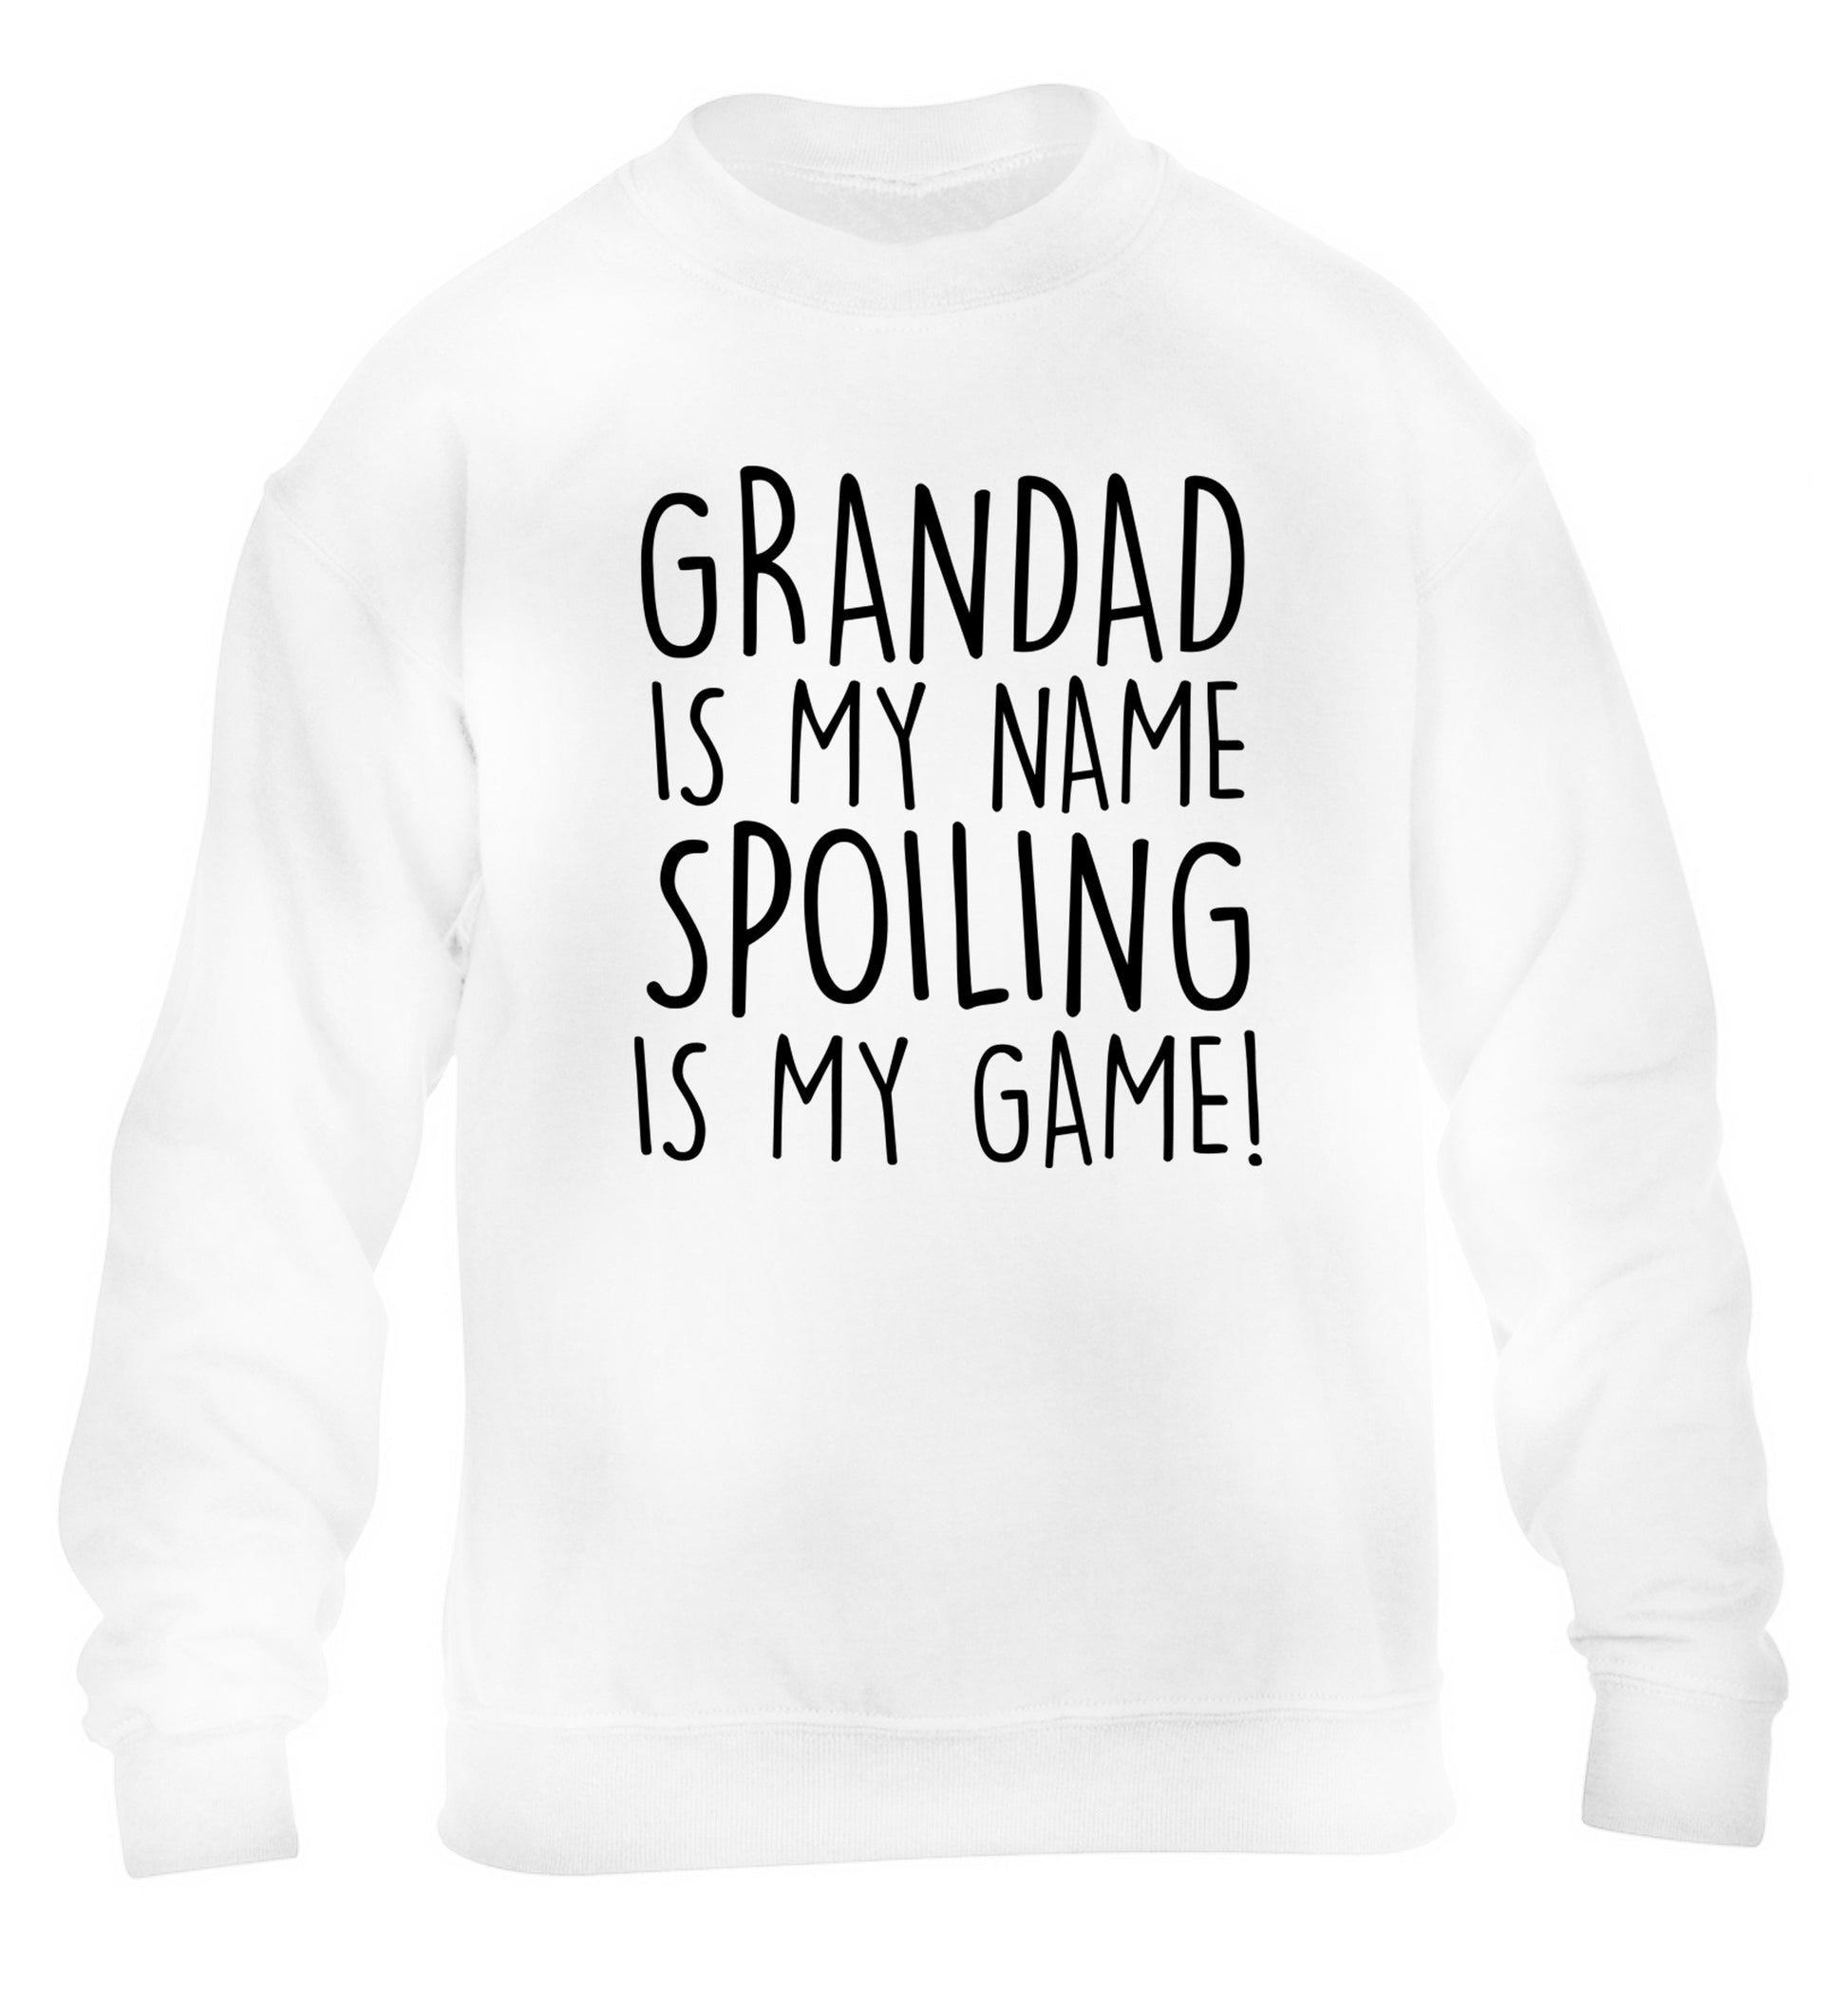 Grandad is my name, spoiling is my game children's white sweater 12-14 Years